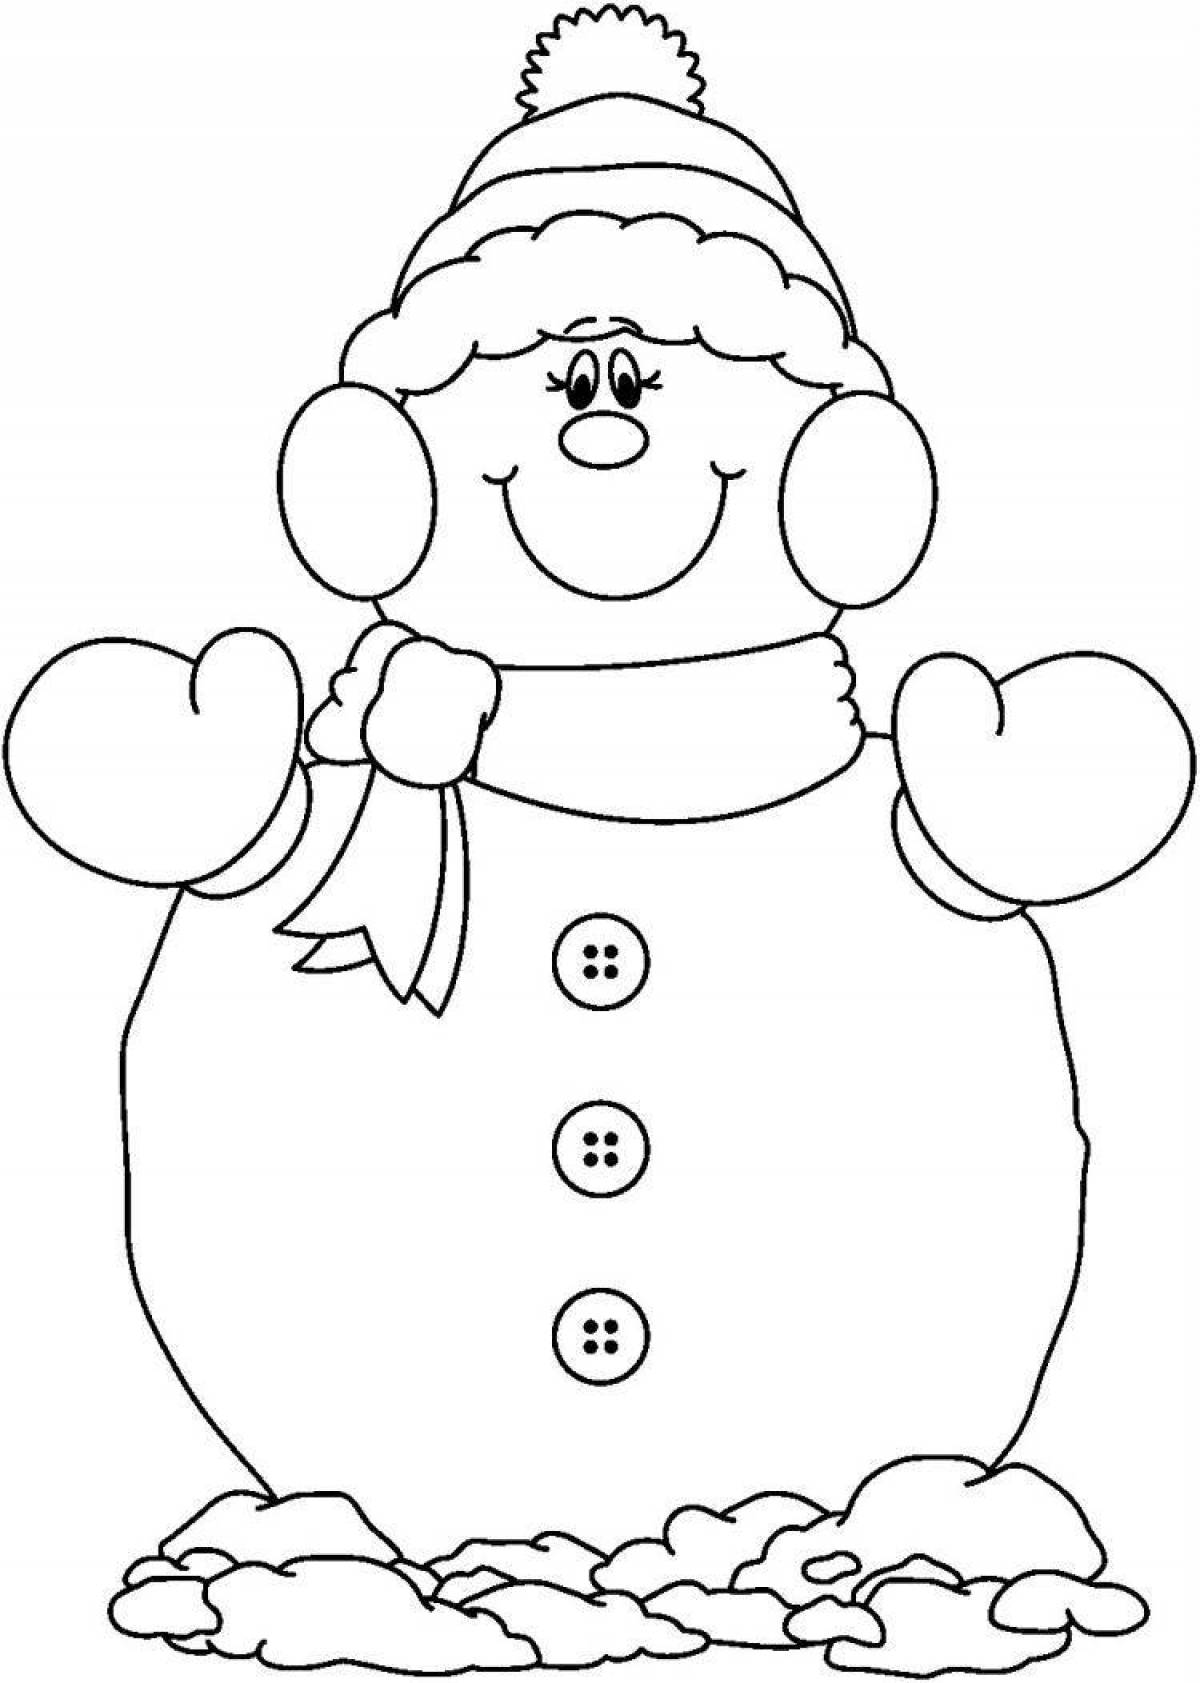 Adorable snowman coloring book for kids 2 3